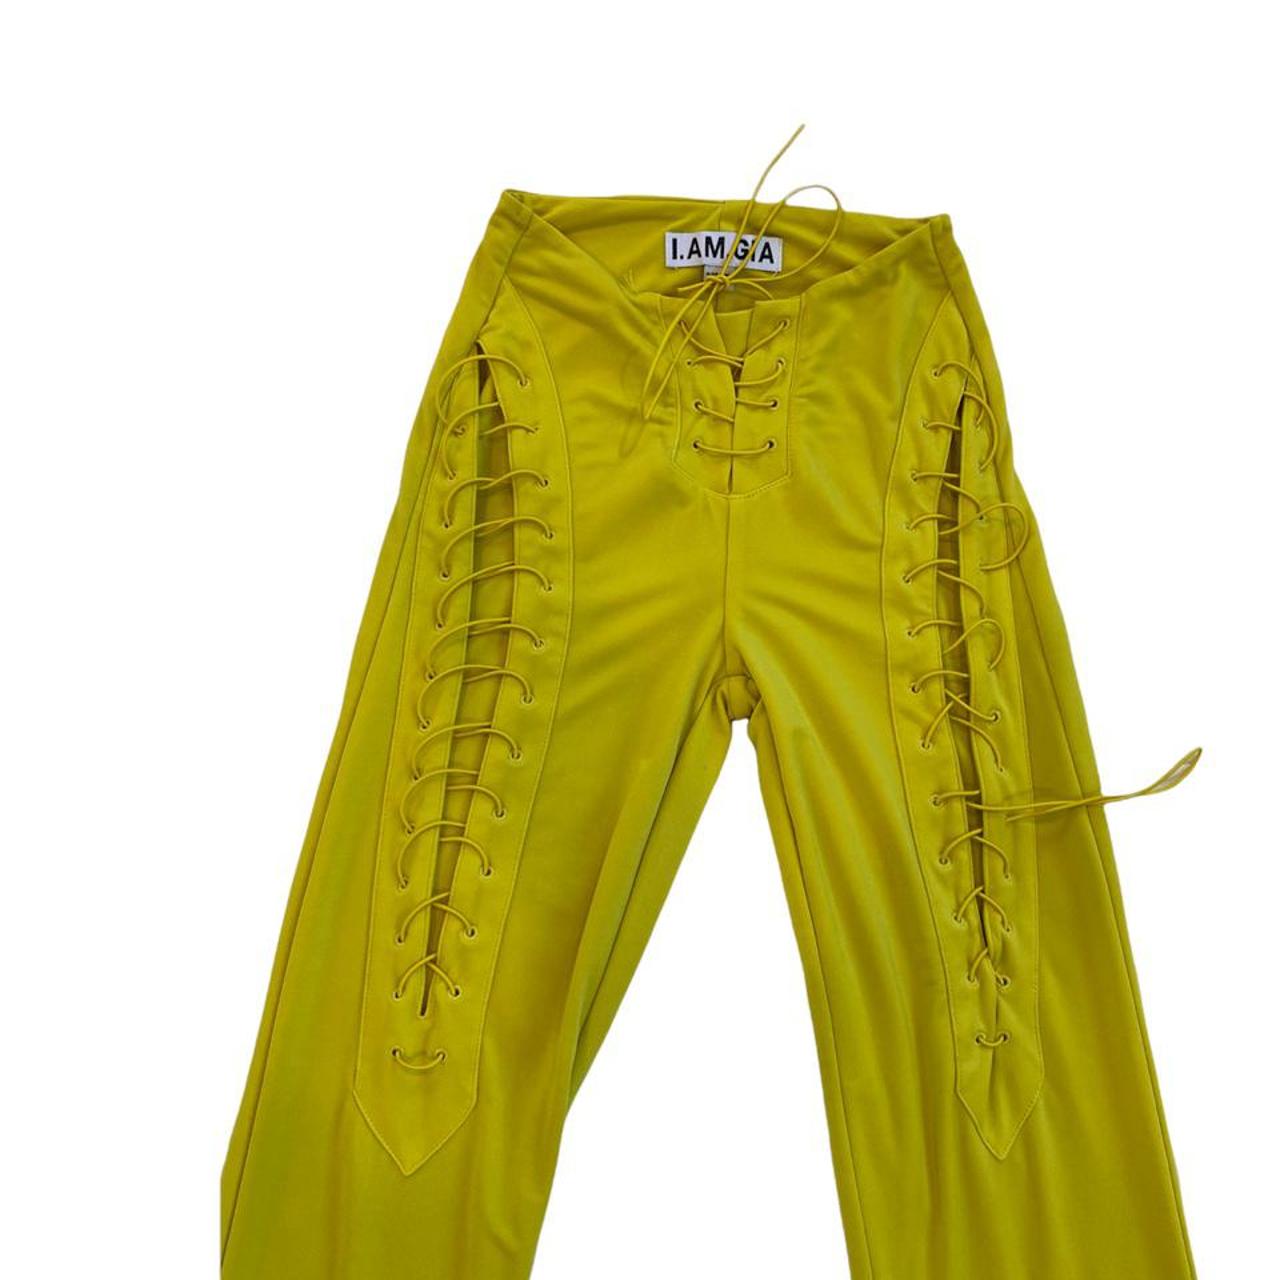 iamgia-yellow-tie-pants-only-worn-once-but-the-depop